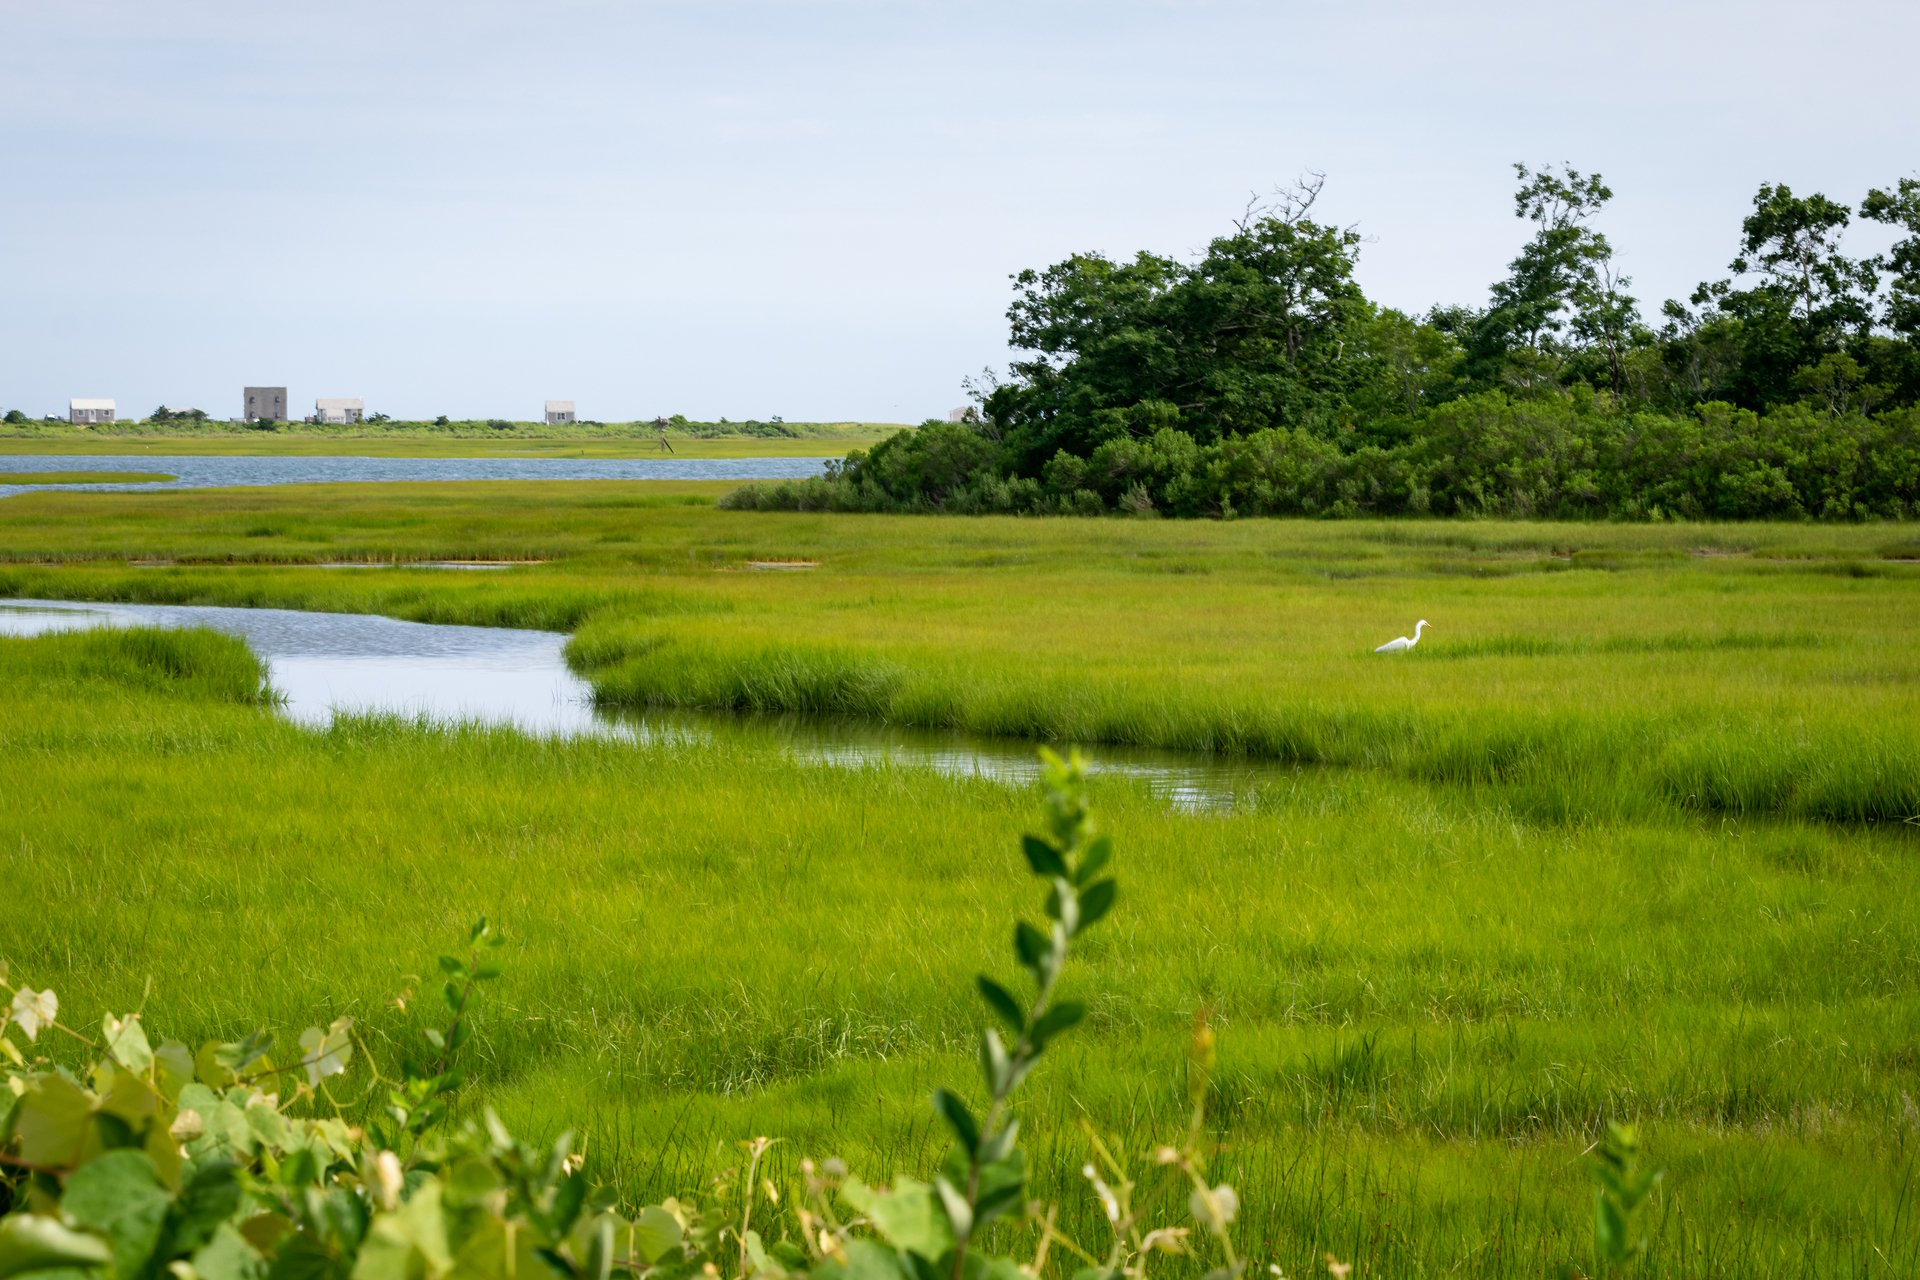 A tall white bird sticks out in a green saltmarsh. A channel of open water cuts through the center of the marsh.